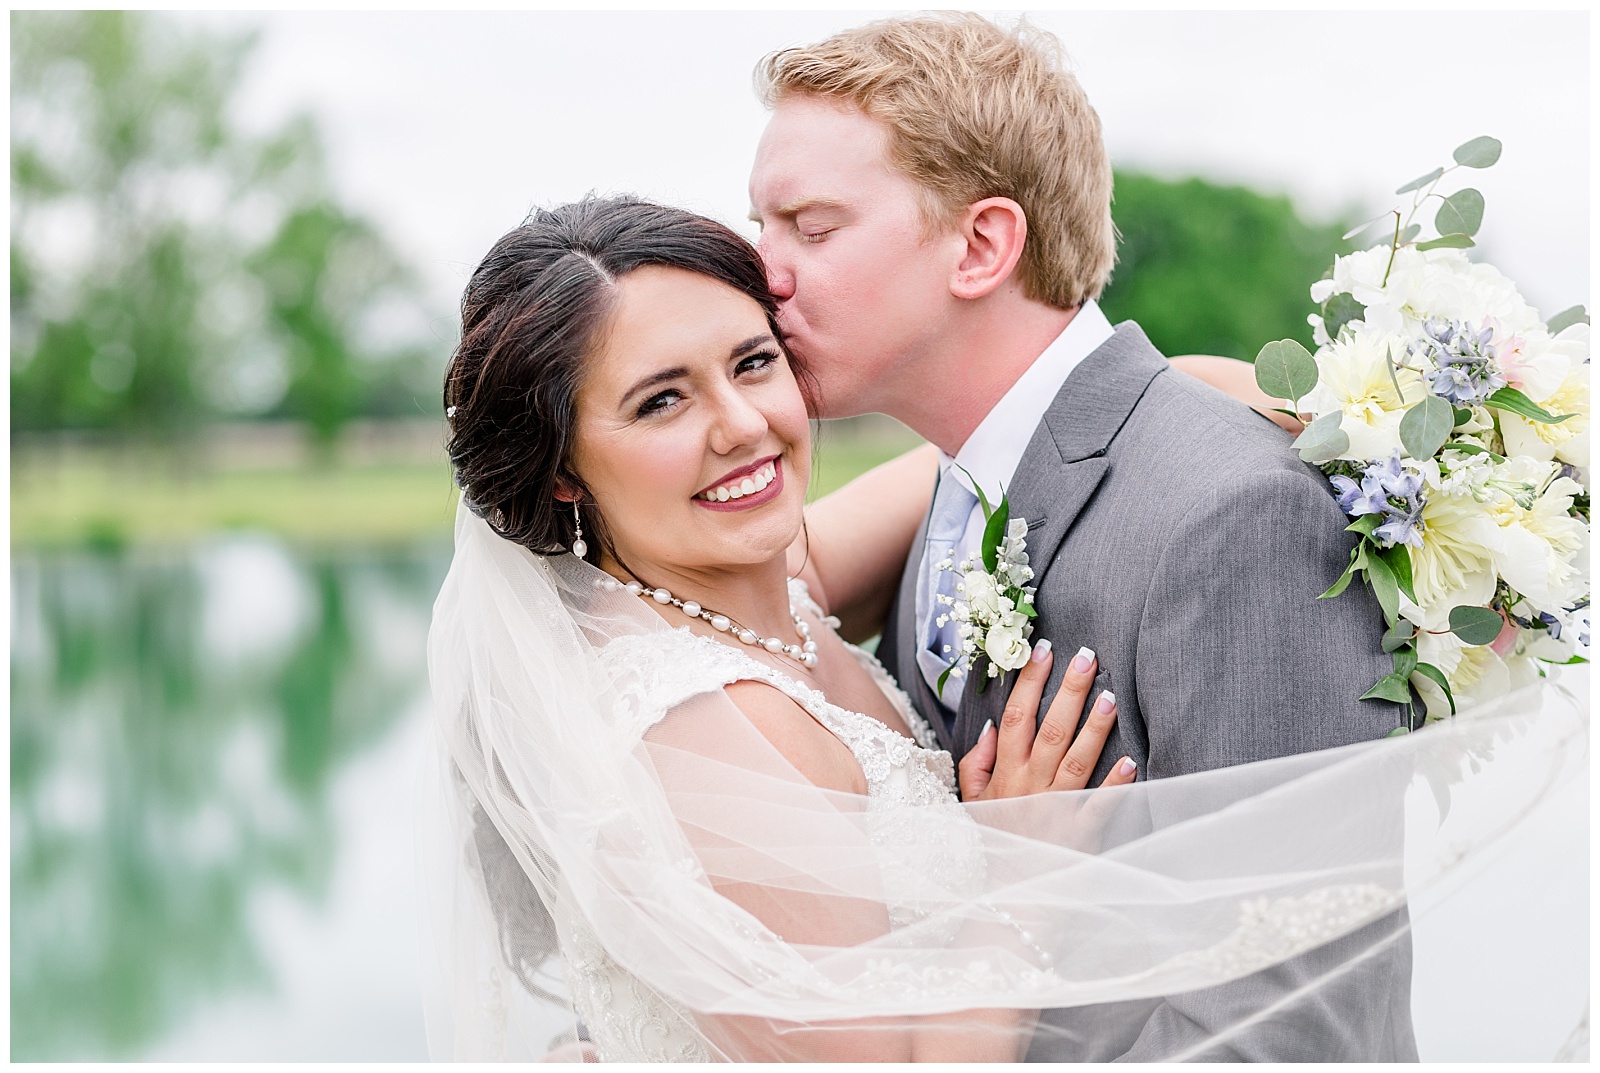 Rustic Farm Alabama Wedding in front of southern pond with mermaid style wedding dress, flowy beaded veil, grey suit, and white, blue, yellow, and pink florals